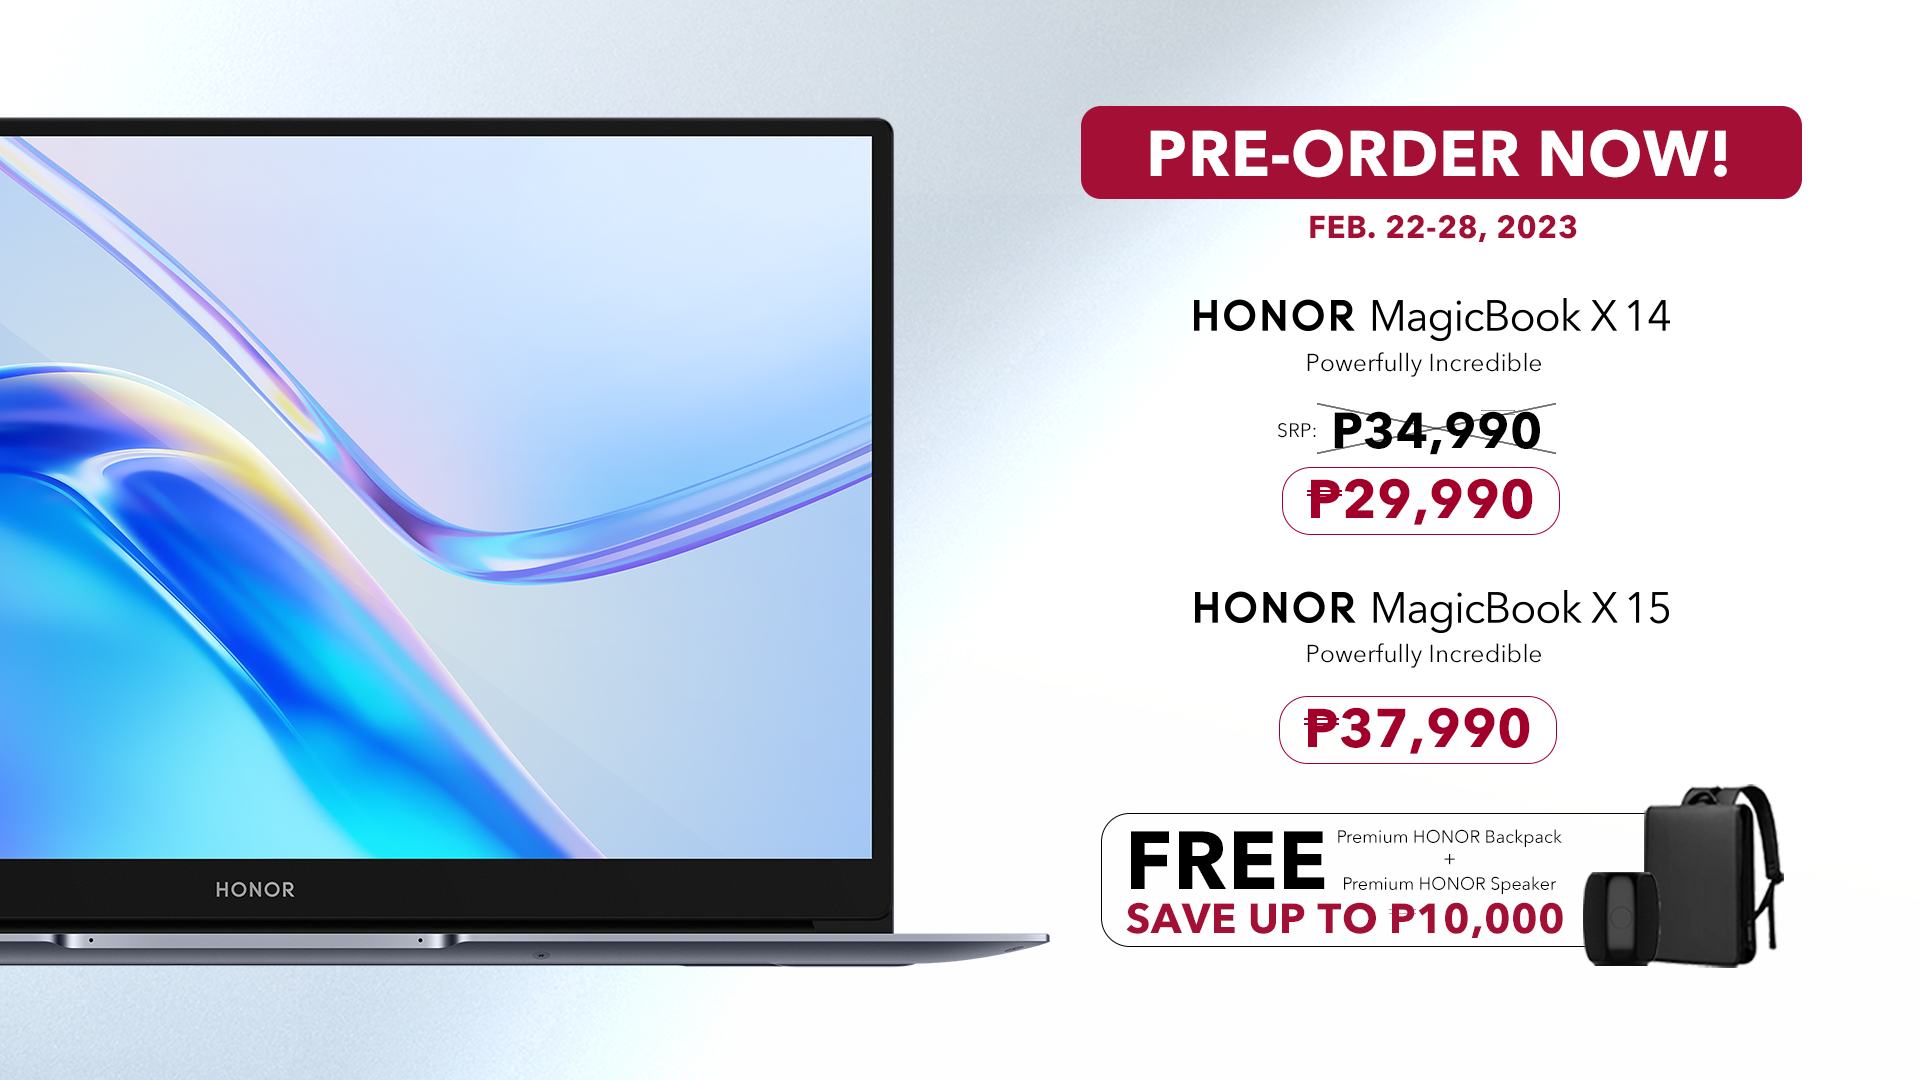 HONOR Philippines launches the two compact and travel buddy MagicBooks in the market - the HONOR MagicBook X 14 and MagicBook X 15. Get FREE HONOR Premium Backpack and HONOR Speaker during the pre-order period, February 22 to February 28! 